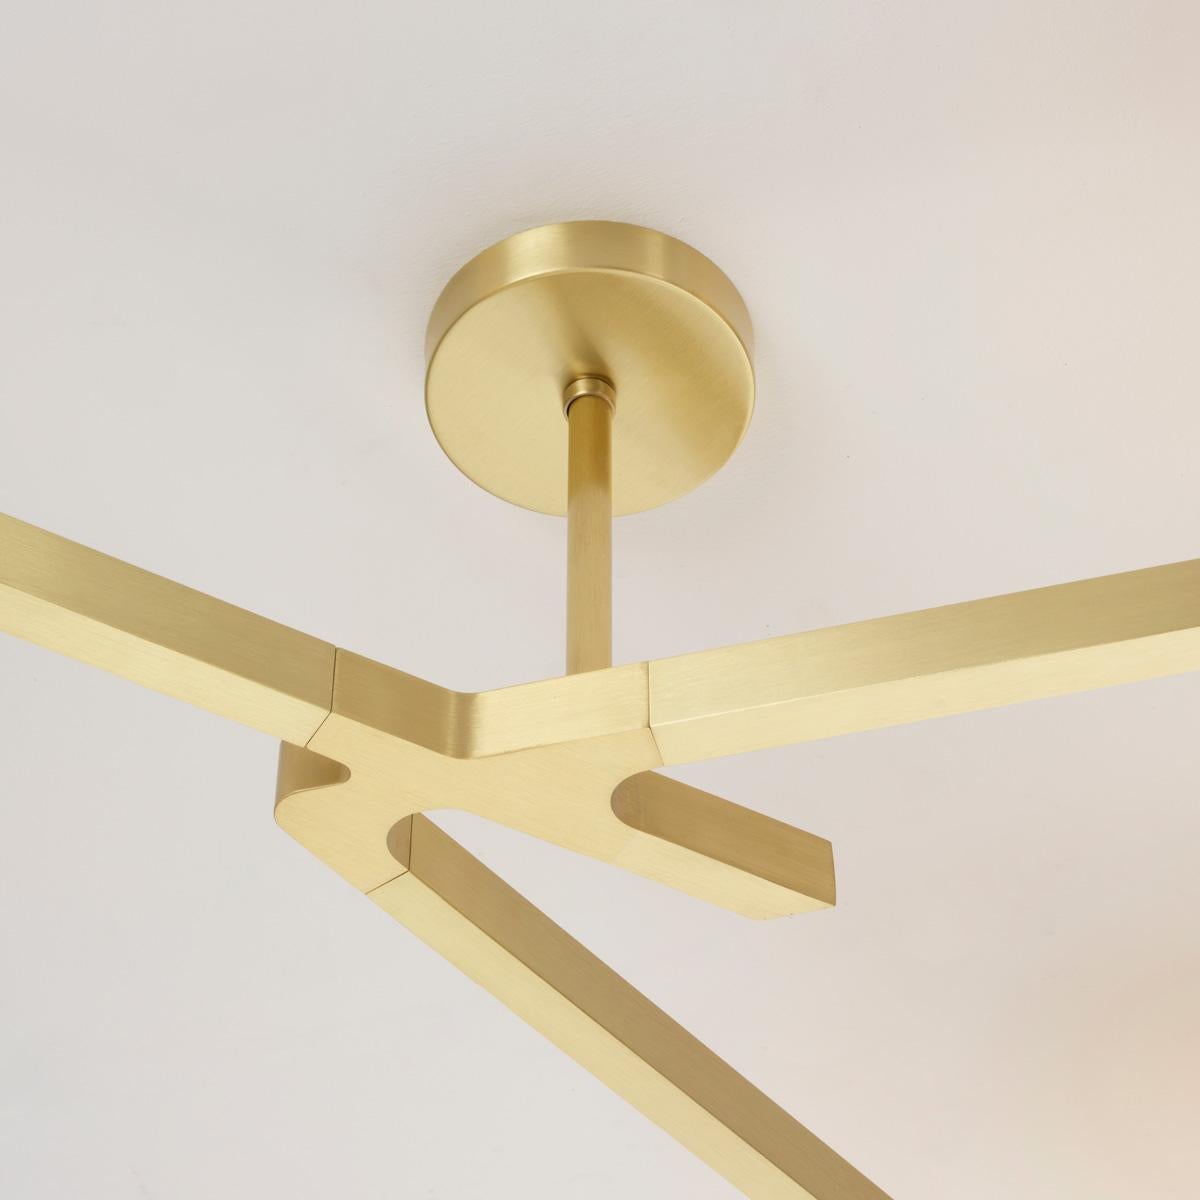 Cuore N.3 Ceiling Light by Gaspare Asaro. Peltro and Bronze Finish For Sale 2